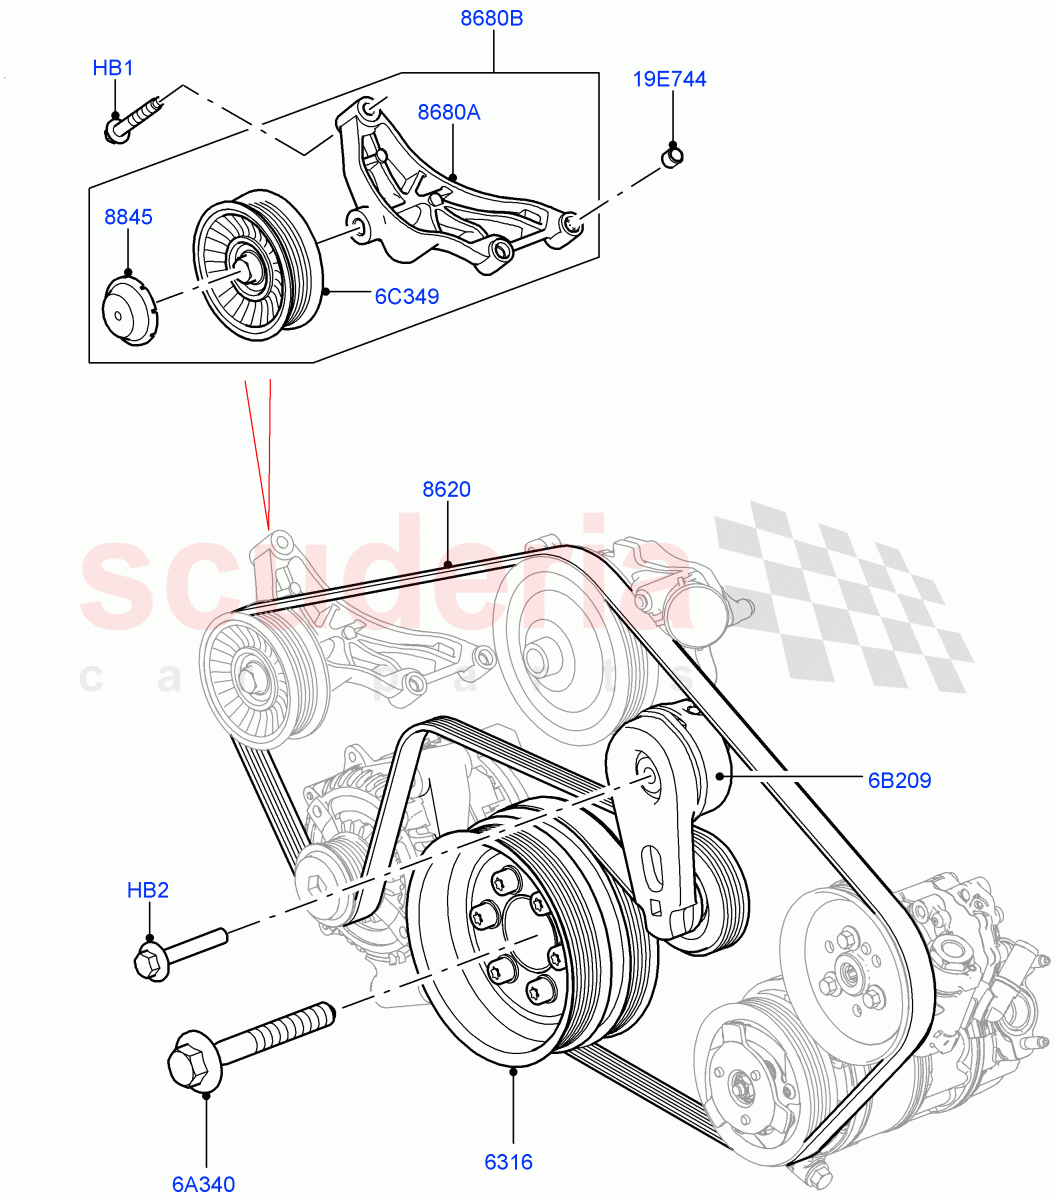 Pulleys And Drive Belts(Primary Drive)(3.0L DOHC GDI SC V6 PETROL)((V)FROMEA000001) of Land Rover Land Rover Discovery 4 (2010-2016) [3.0 DOHC GDI SC V6 Petrol]